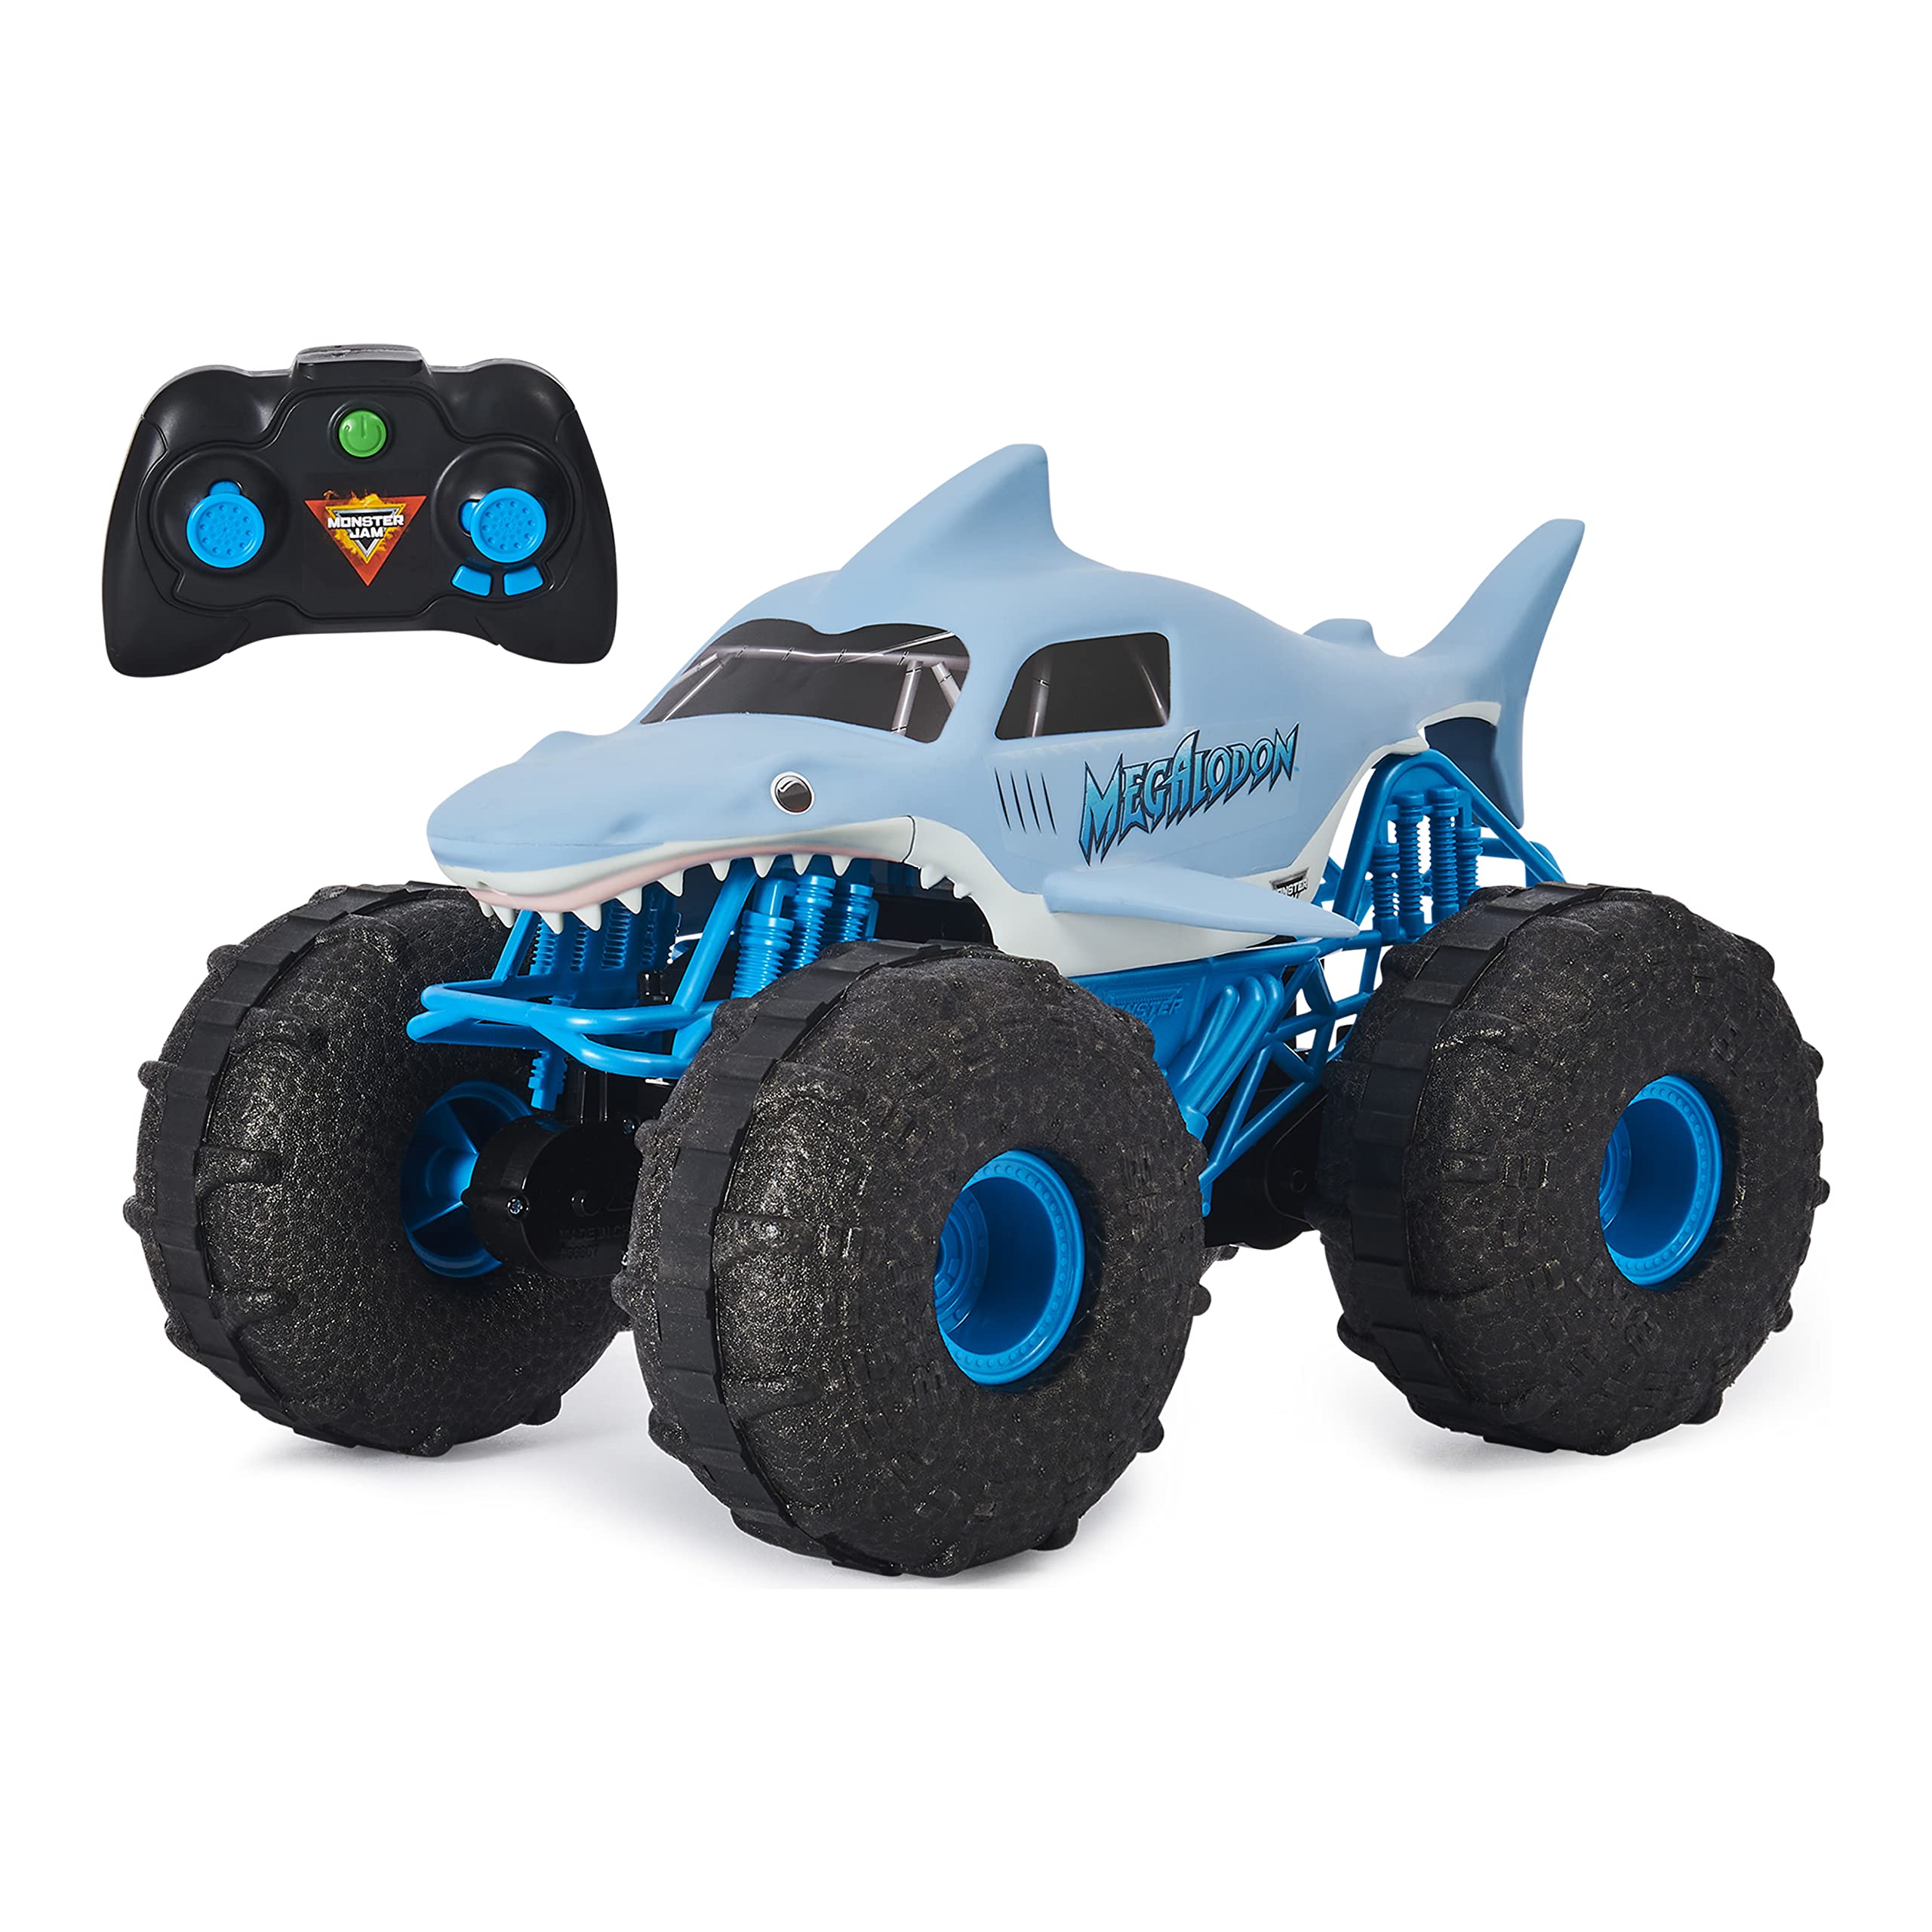 Megalodon Storm Remote Control Monster Truck